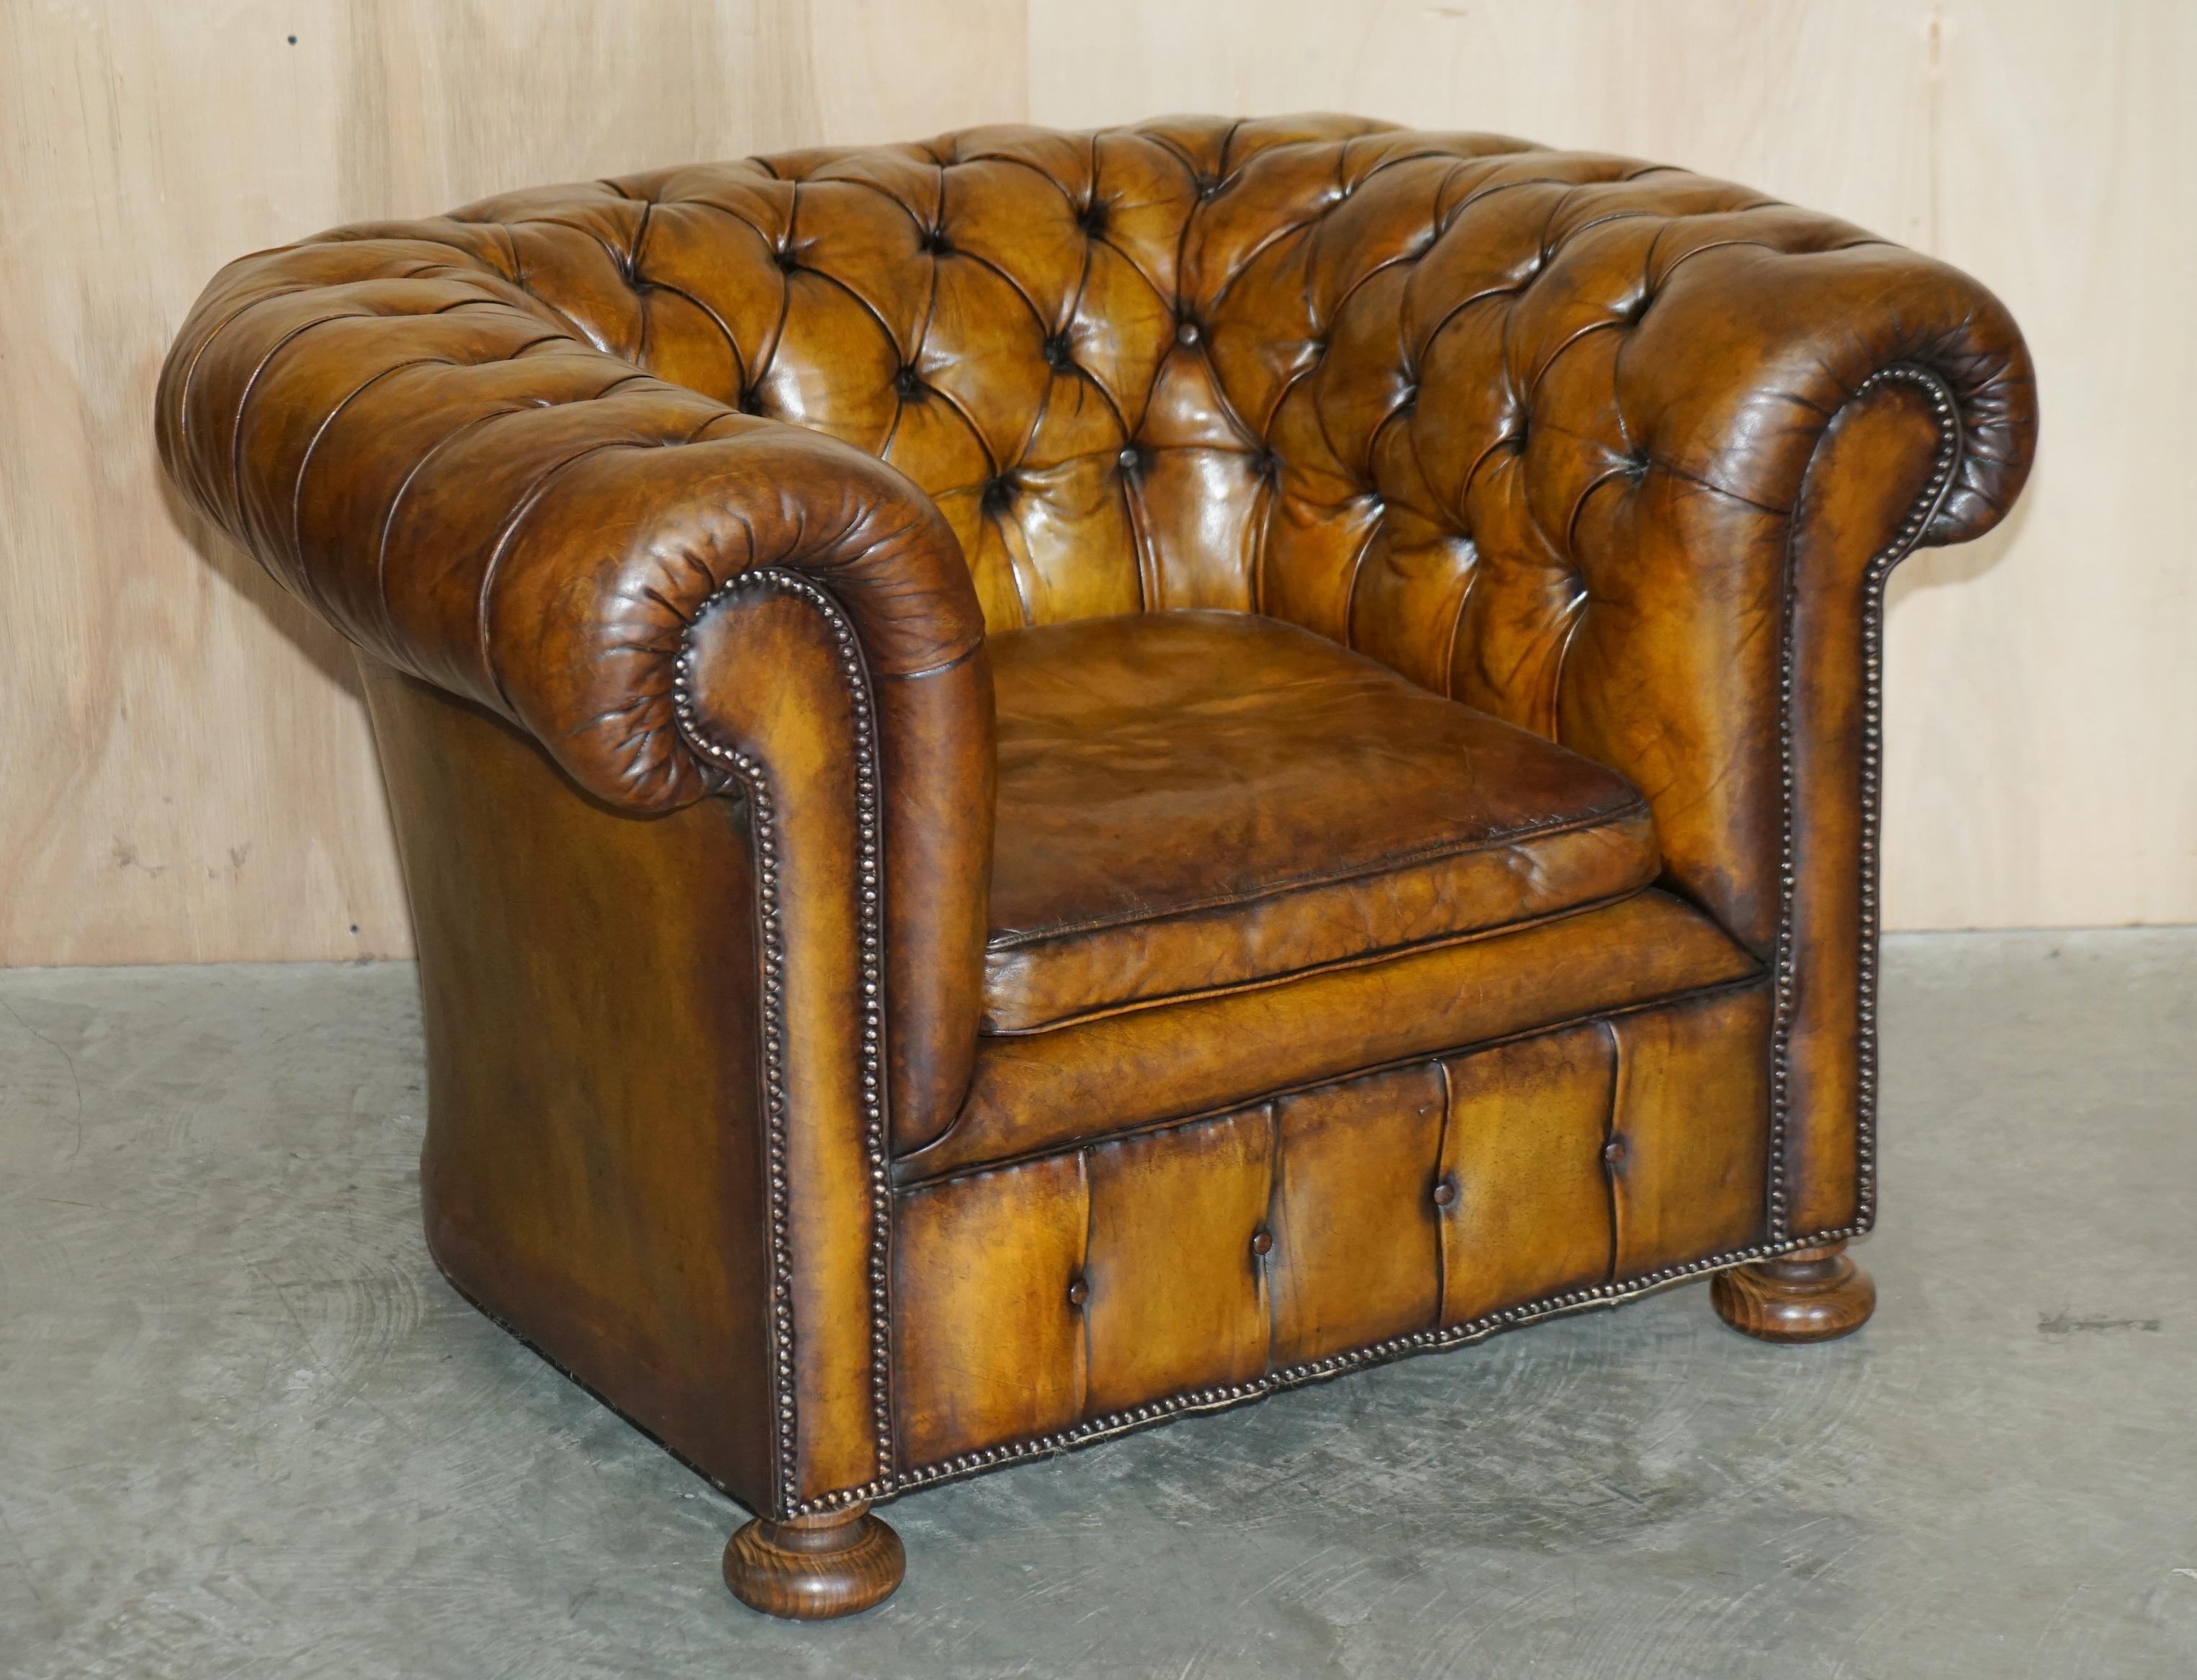 We are delighted to offer for sale this lovely original pair of circa 1900s fully restored hand dyed Whiskey brown leather Chesterfield fully buttoned club armchairs

A good looking and iconic pair of English club armchairs. Known the world over as